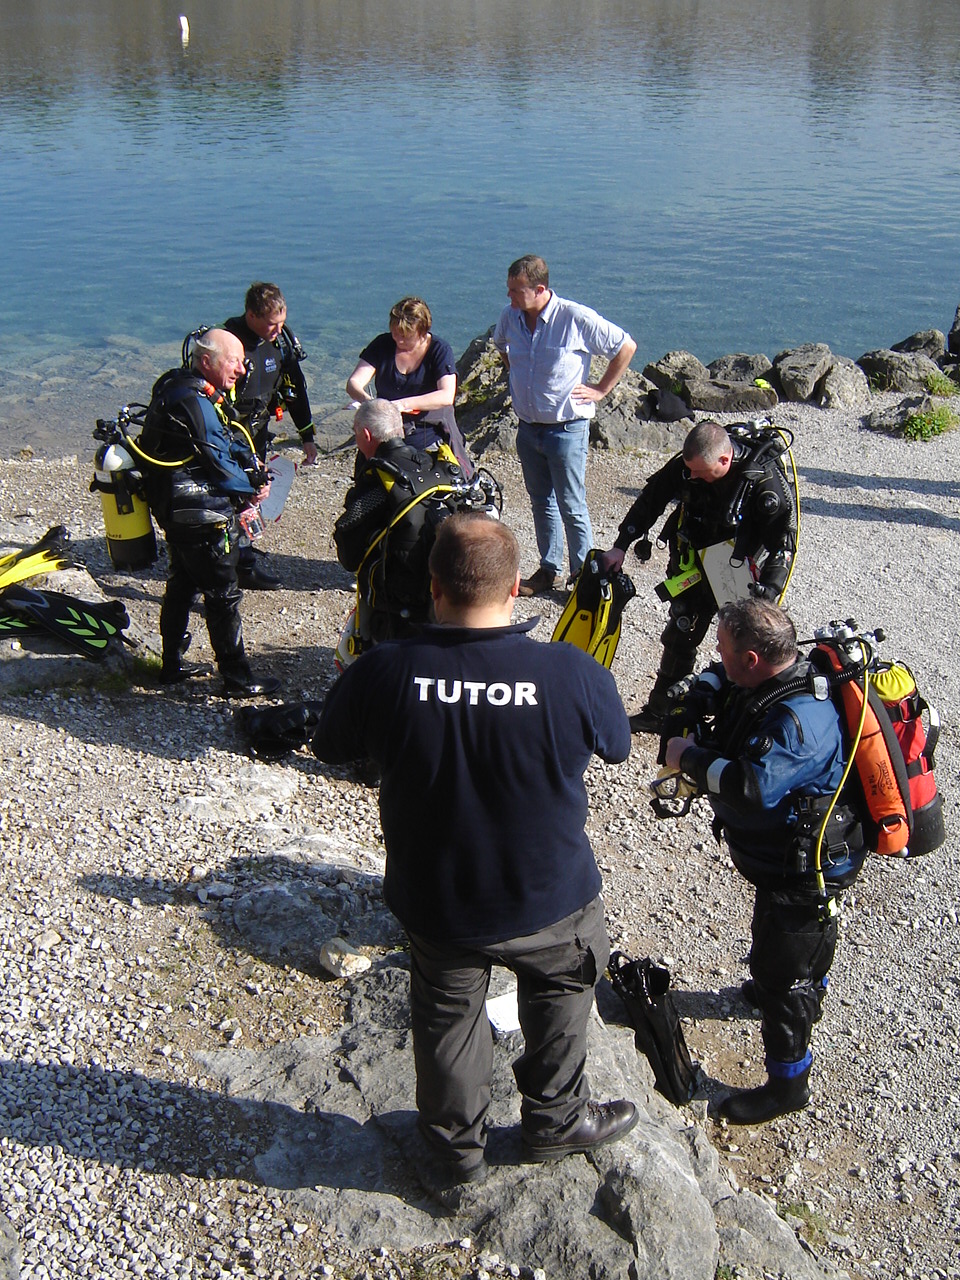 Divers being debriefed